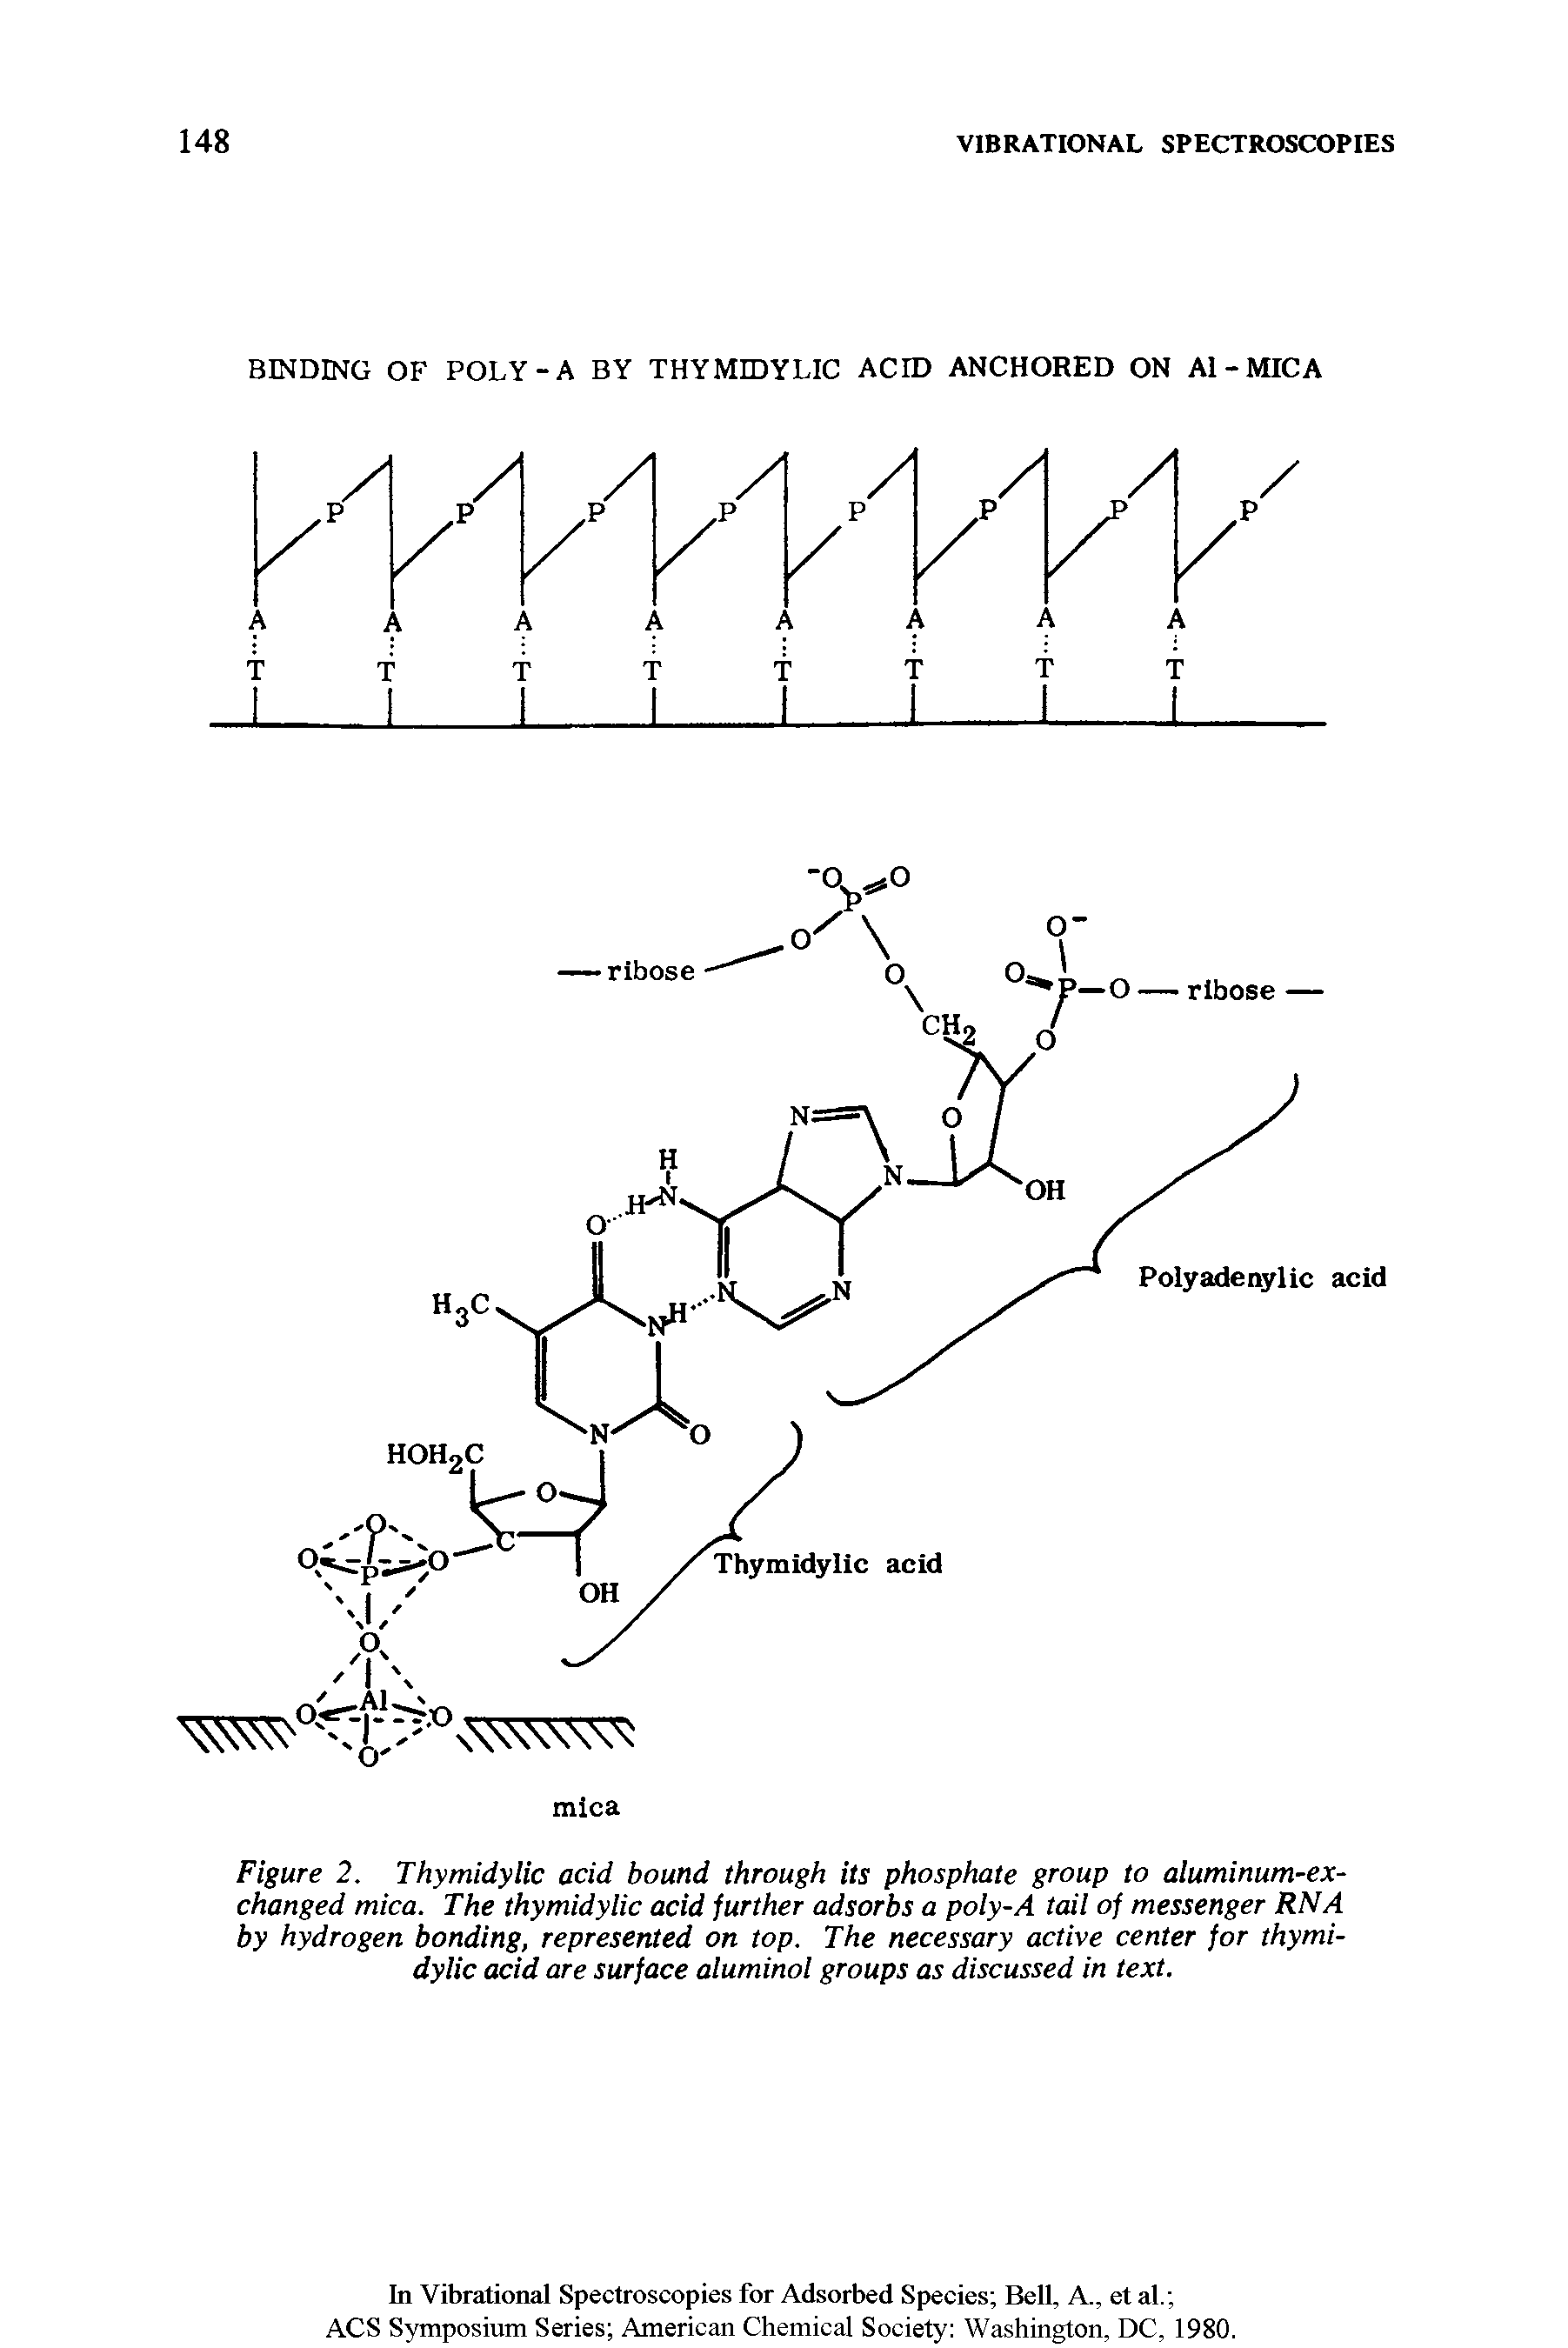 Figure 2. Thymidylic acid bound through its phosphate group to aluminum-exchanged mica. The thymidylic acid further adsorbs a poly-A tail of messenger RNA by hydrogen bonding, represented on top. The necessary active center for thymidylic acid are surface aluminol groups as discussed in text.